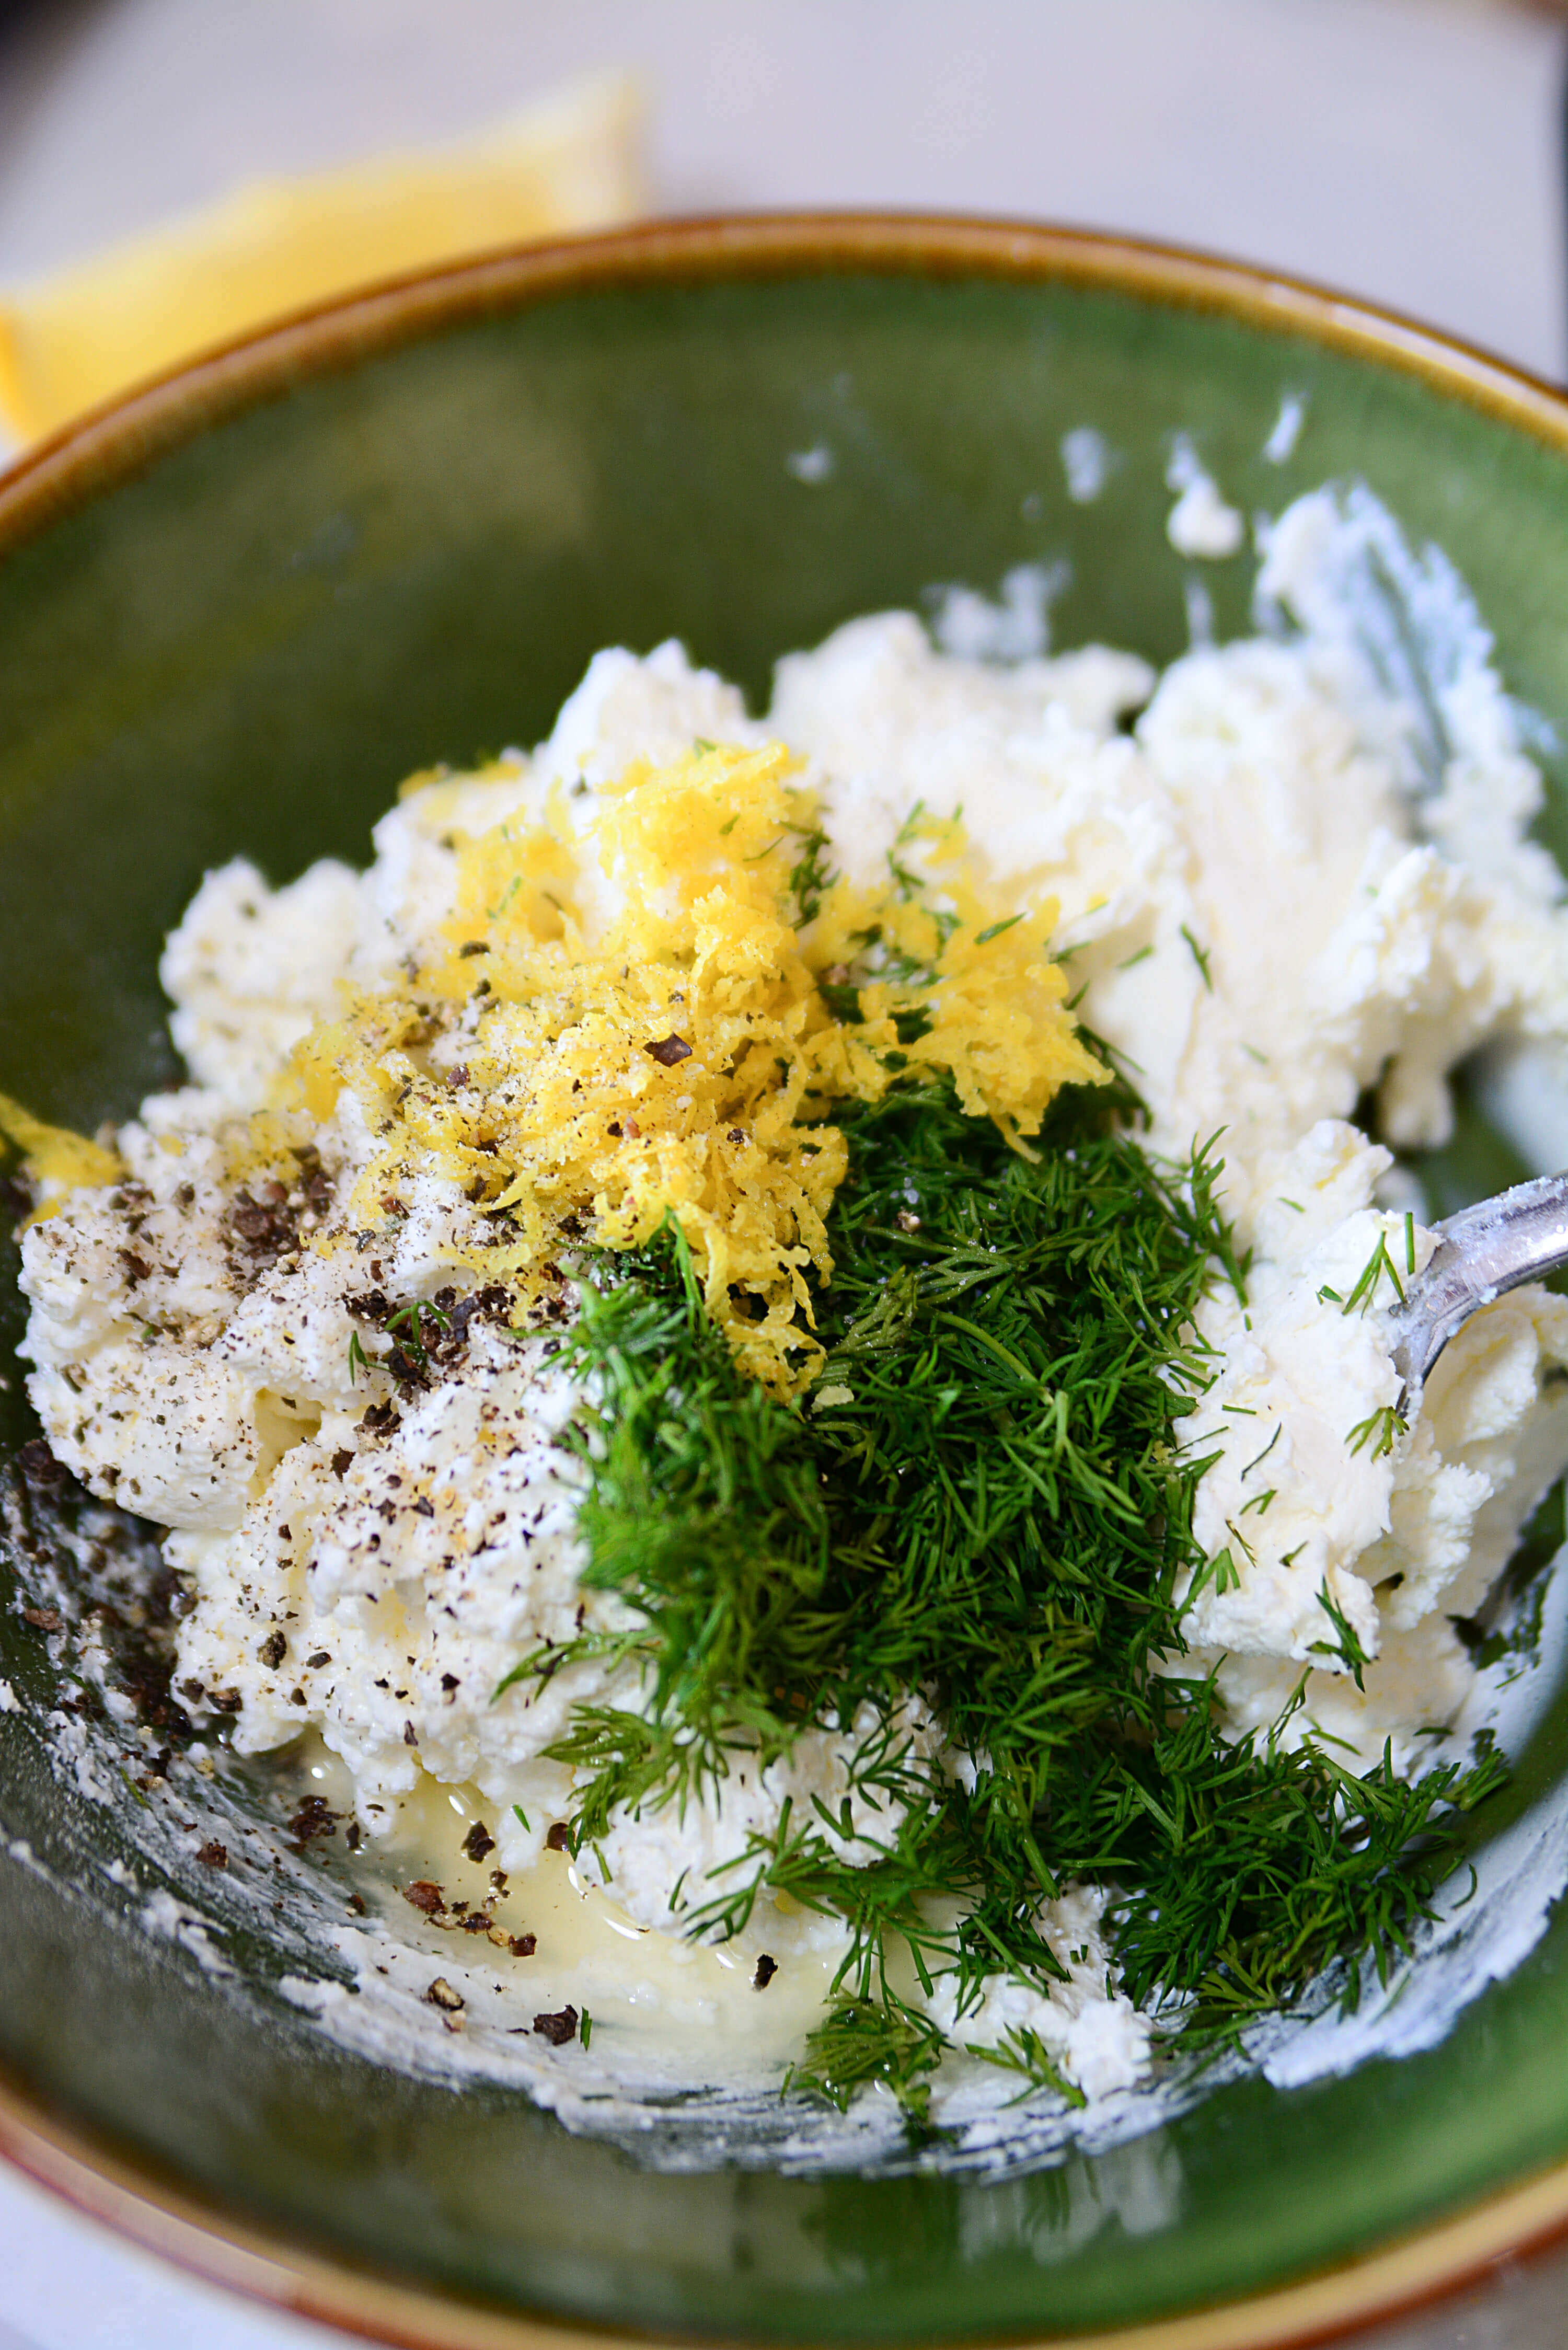 Lemon, dill, salt and pepper being added to the cheese in a green bowl.